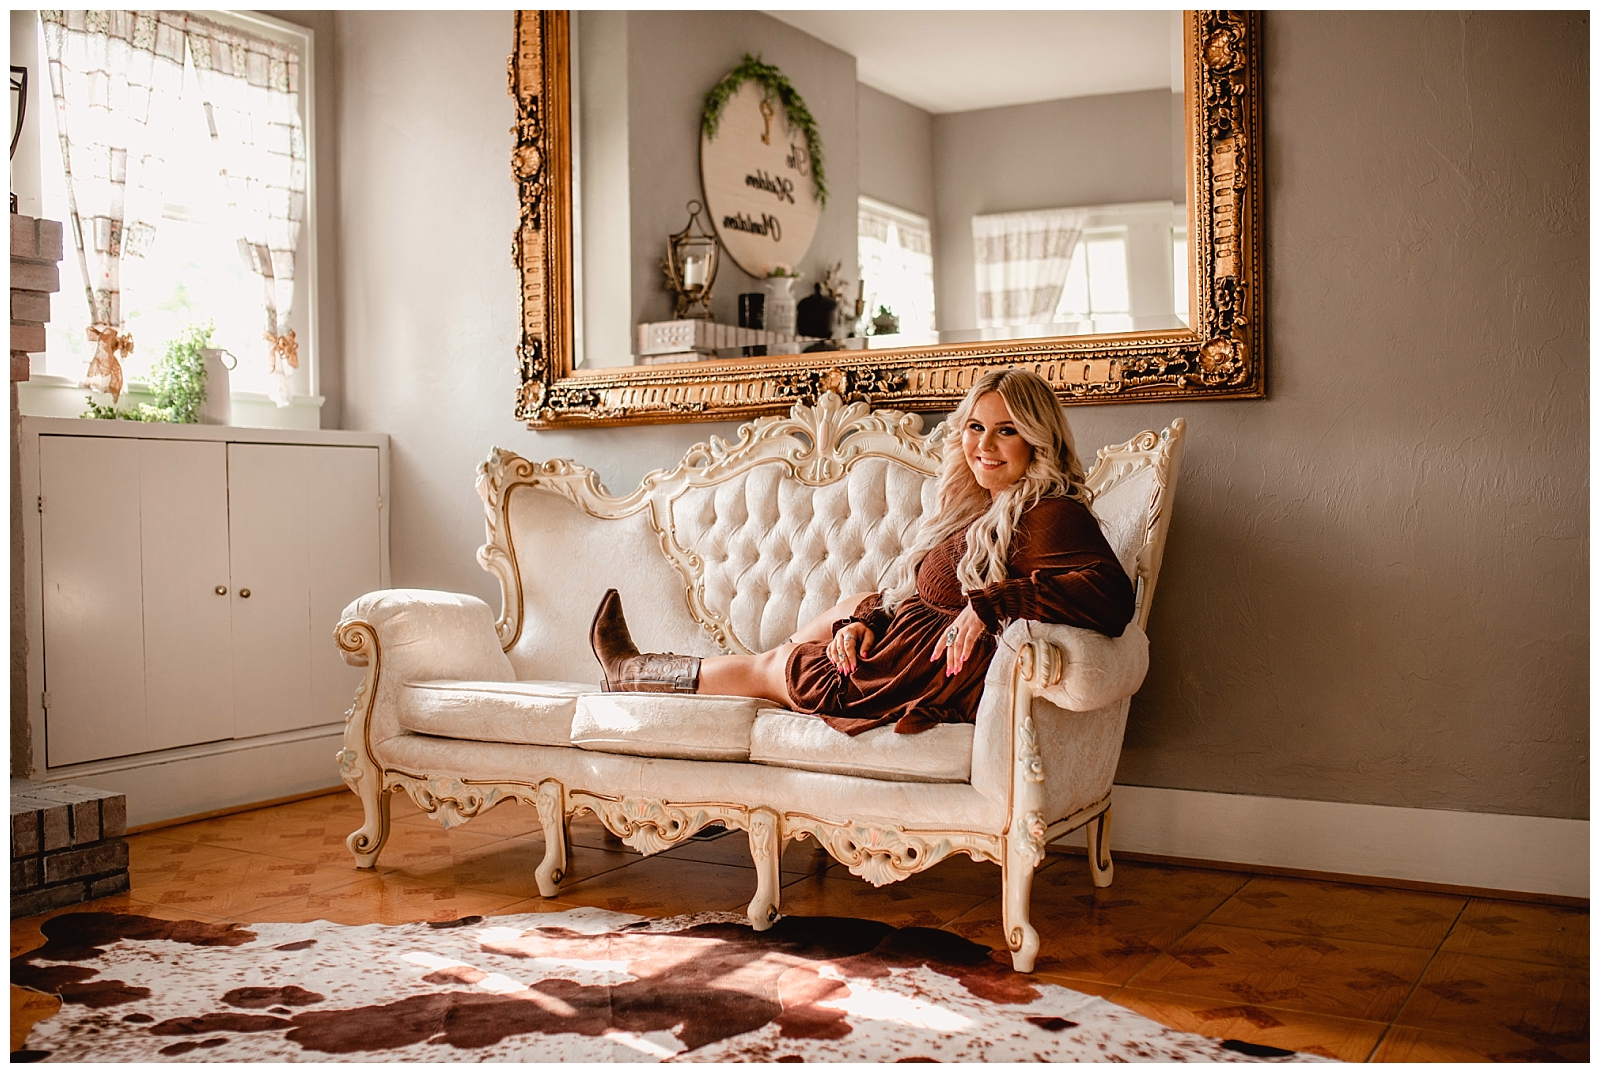 Southern senior pictures with cow hide rug and cowboy boots. North FL Senior Photographer.